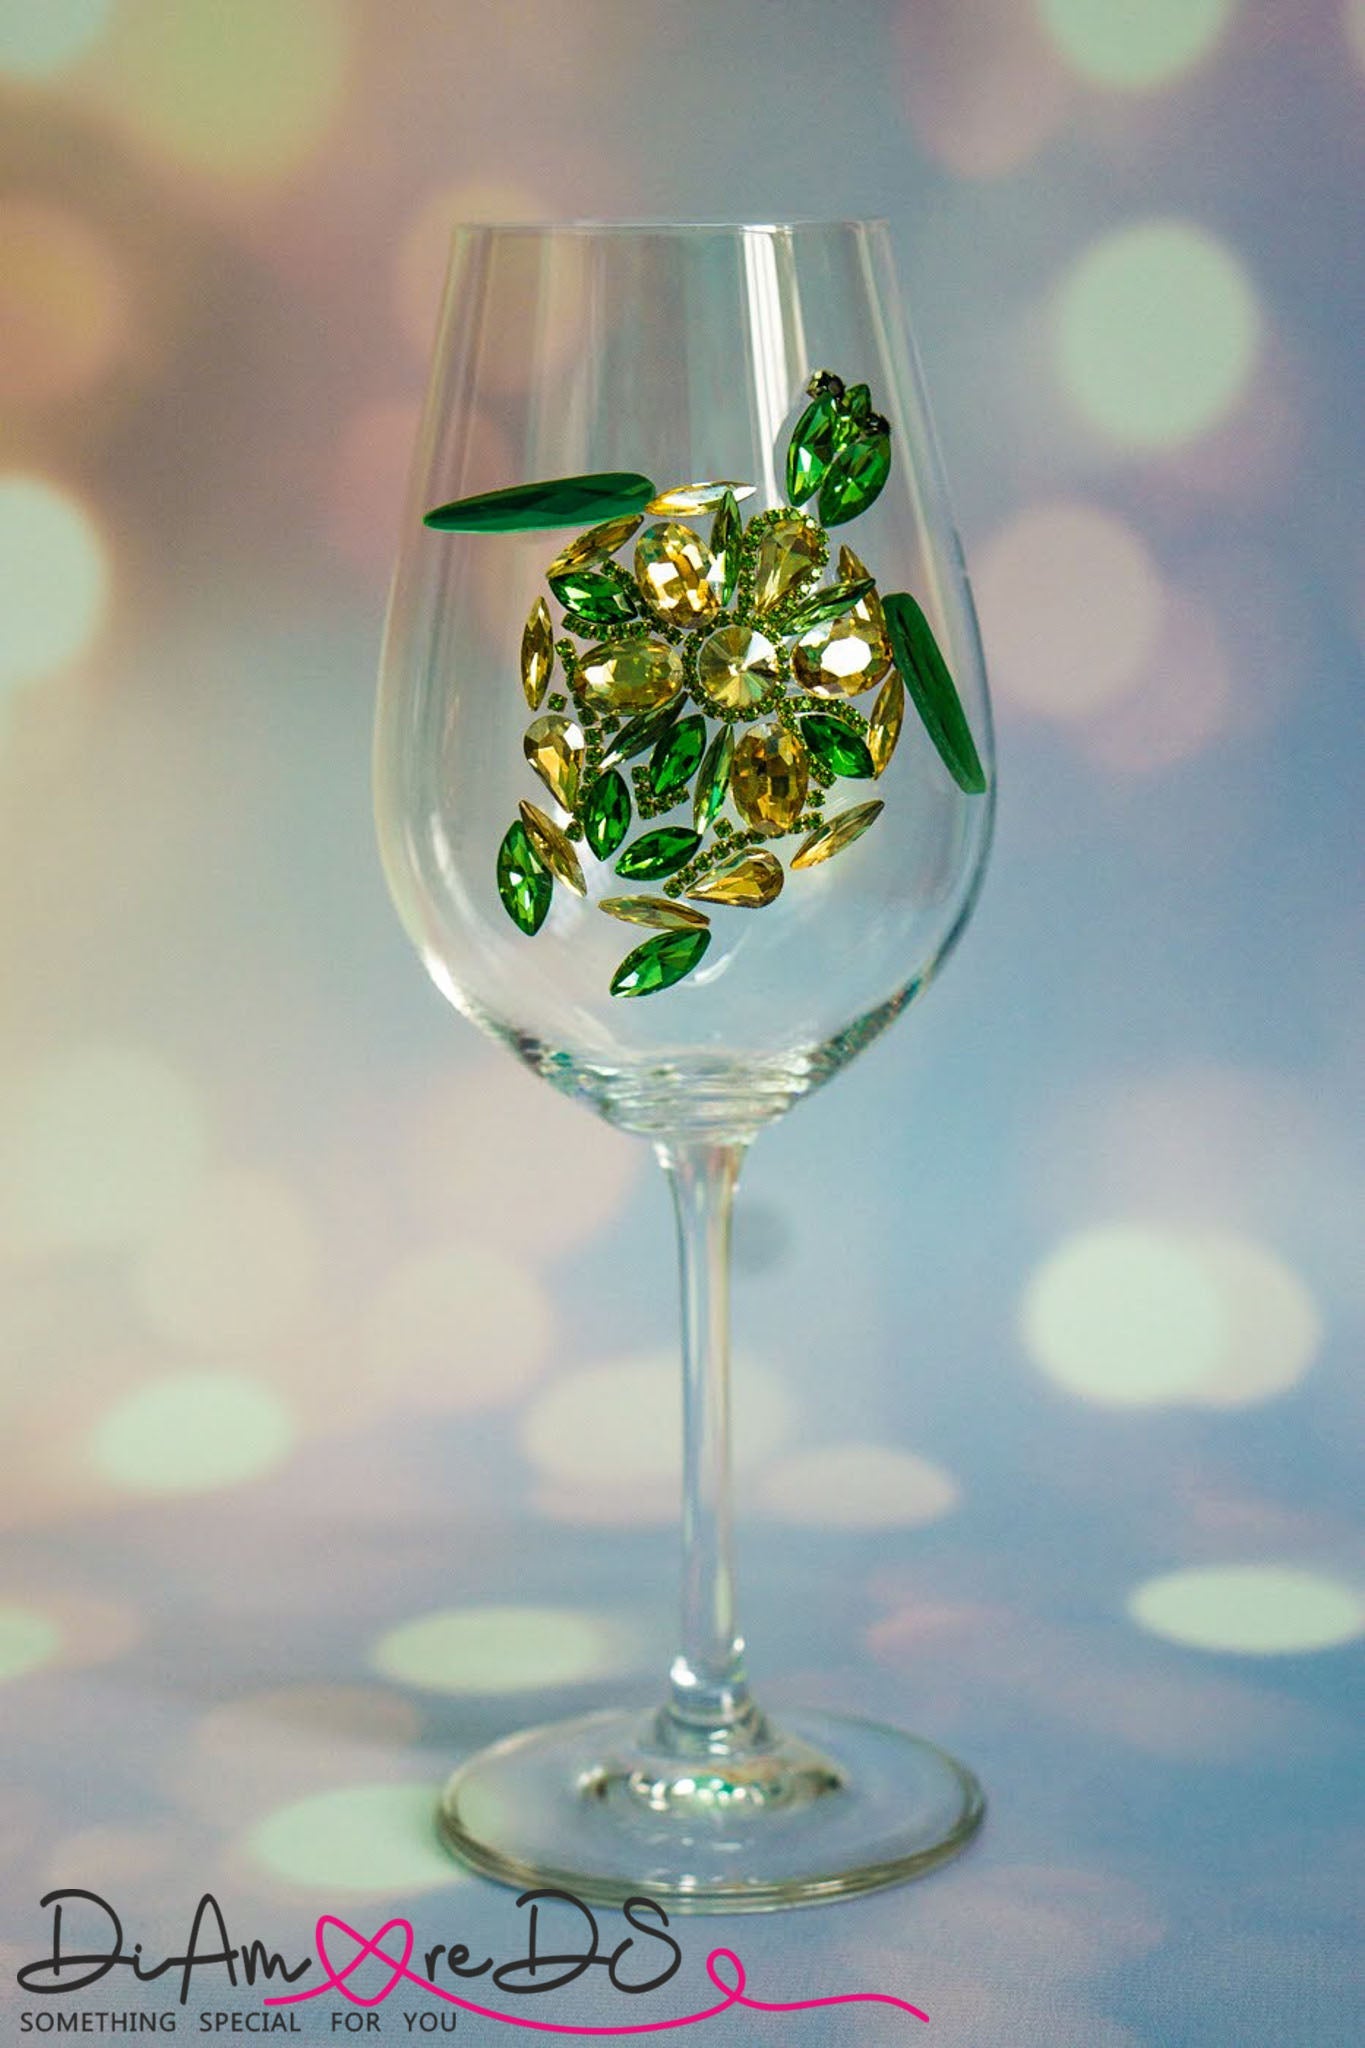 Exquisite sea turtle champagne glass with emerald and gold crystals, bringing marine elegance to any table setting.